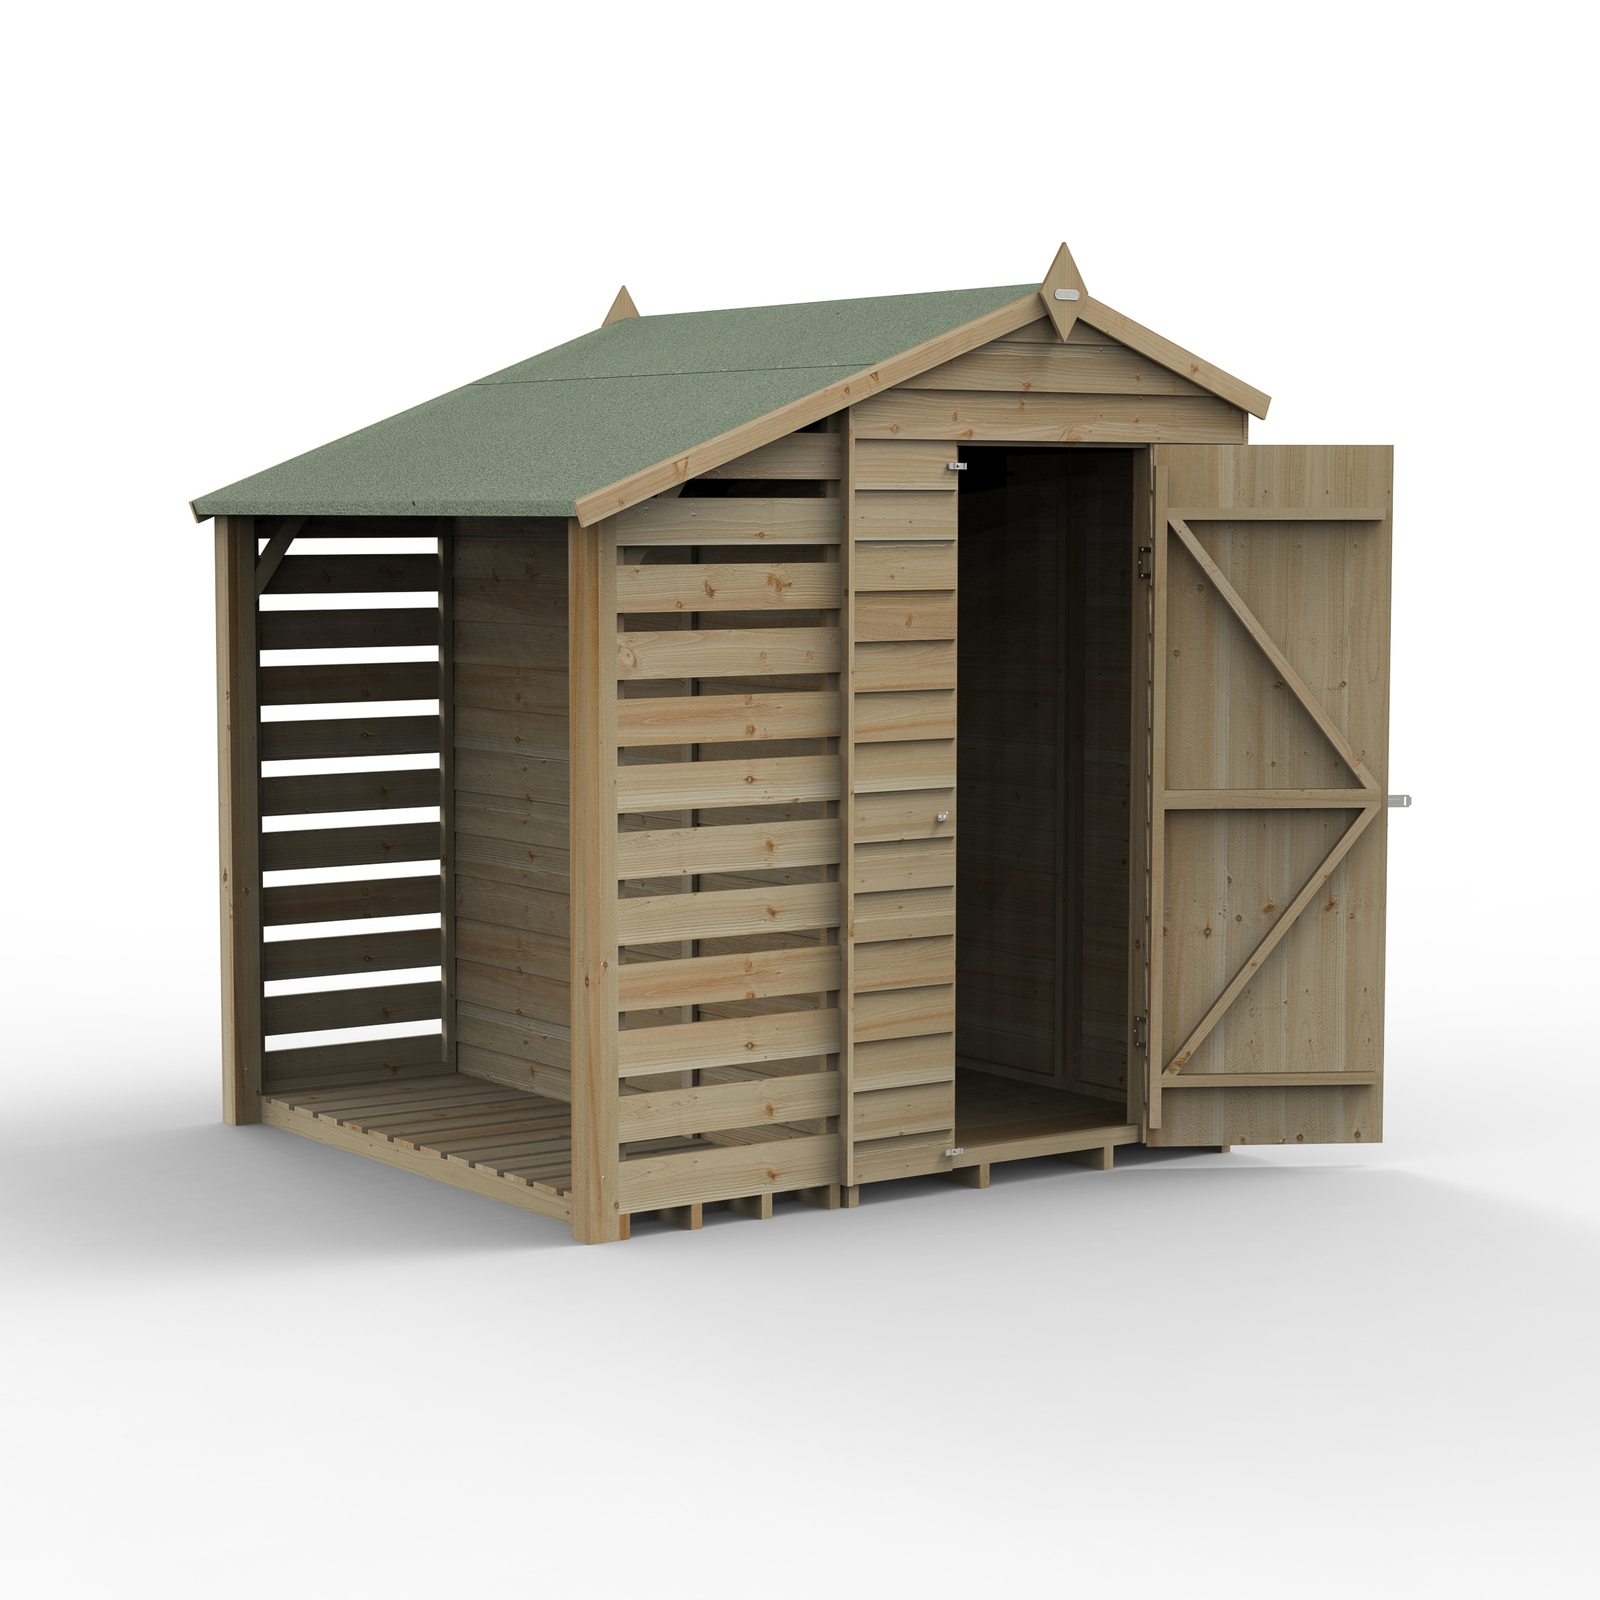 Forest Garden 4LIFE Apex Shed 4 x 6ft - Single Door No Window With Lean-To (Home Delivery)